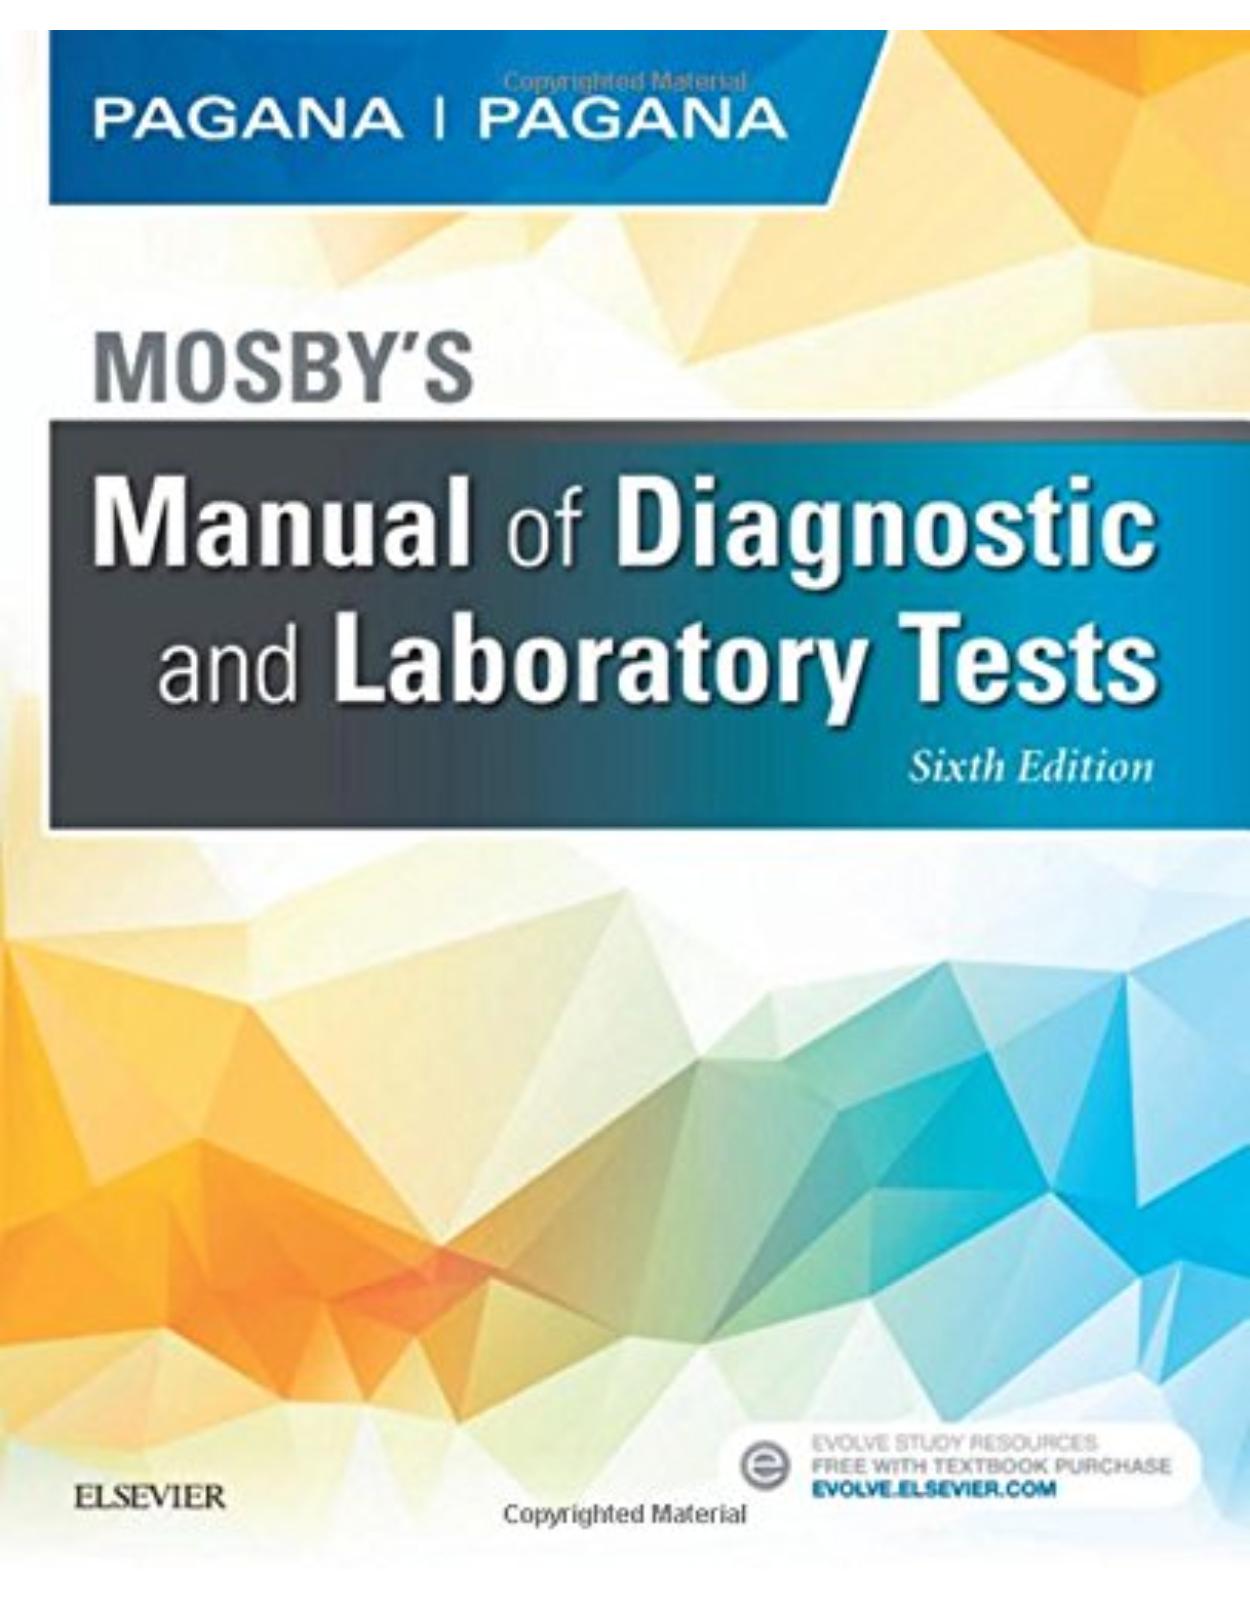 Mosby’s Manual of Diagnostic and Laboratory Tests, 6e